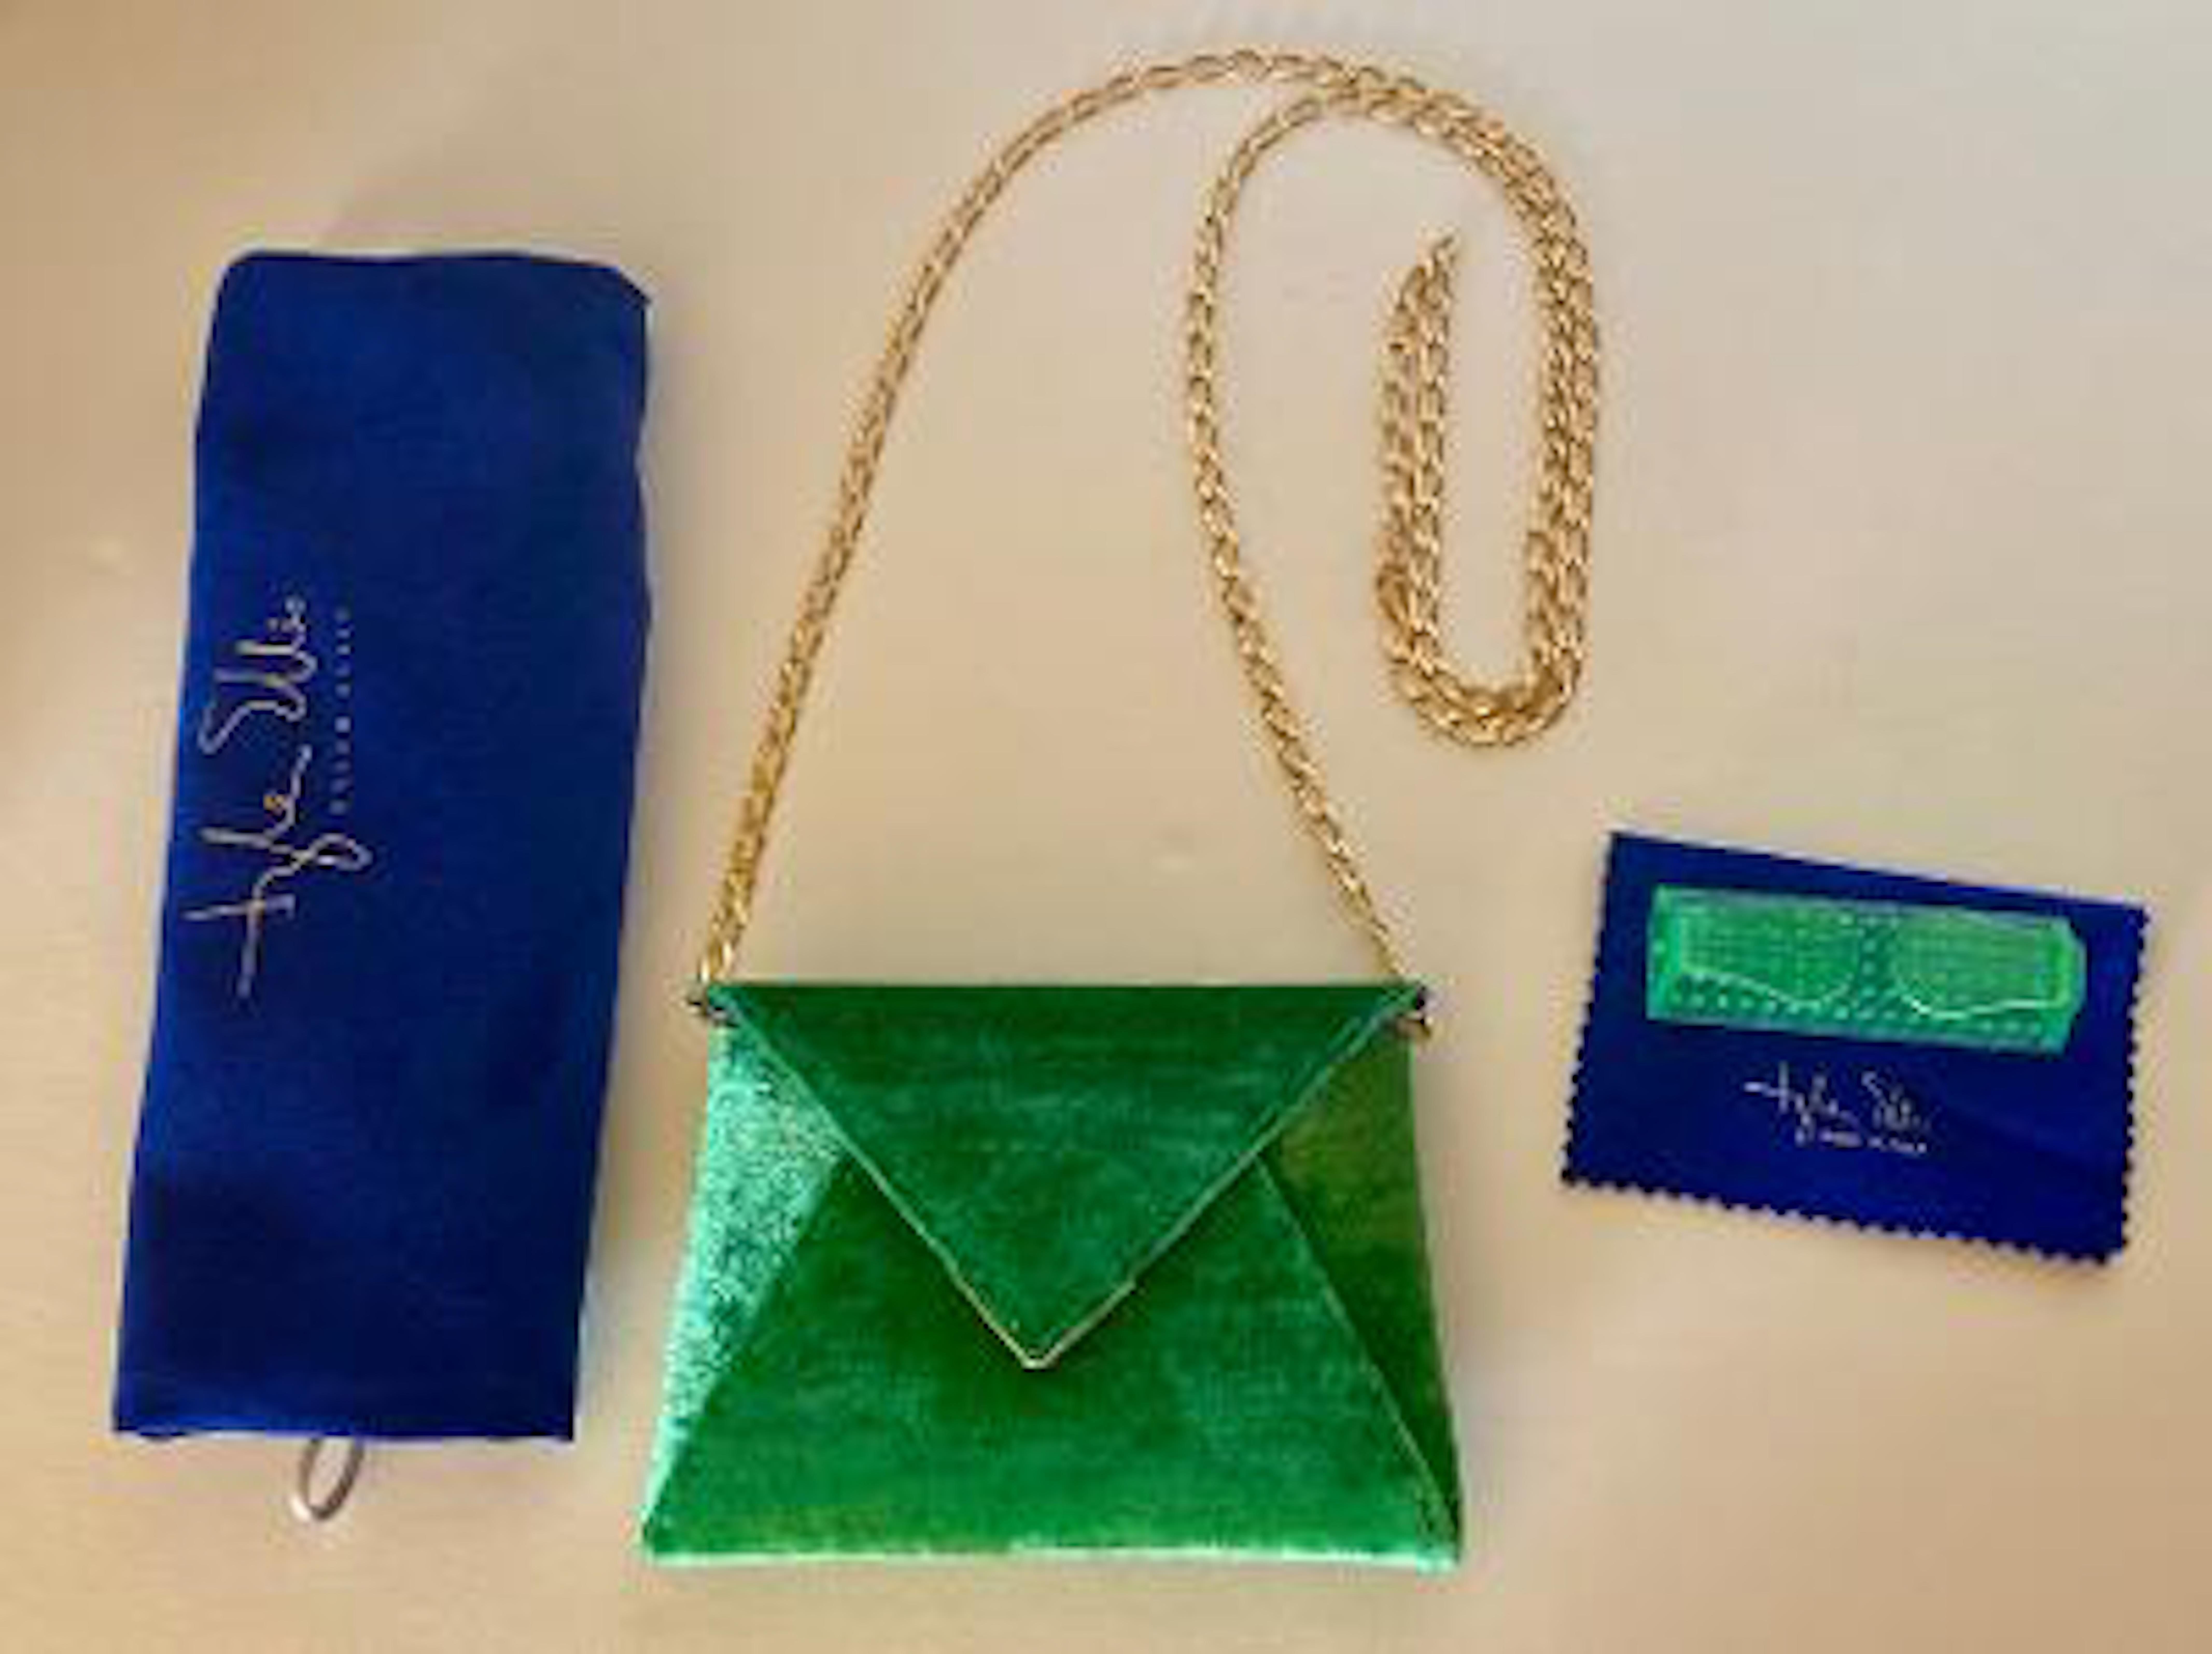 Fabulous couture designer, Tyler Ellis, custom hand made crushed velvet shamrock or emerald green envelope shaped Lee Pouchet clutch with a triangular front flap and a magnetic closure.  There is a hidden exterior pocket on the back.  Perfect to use